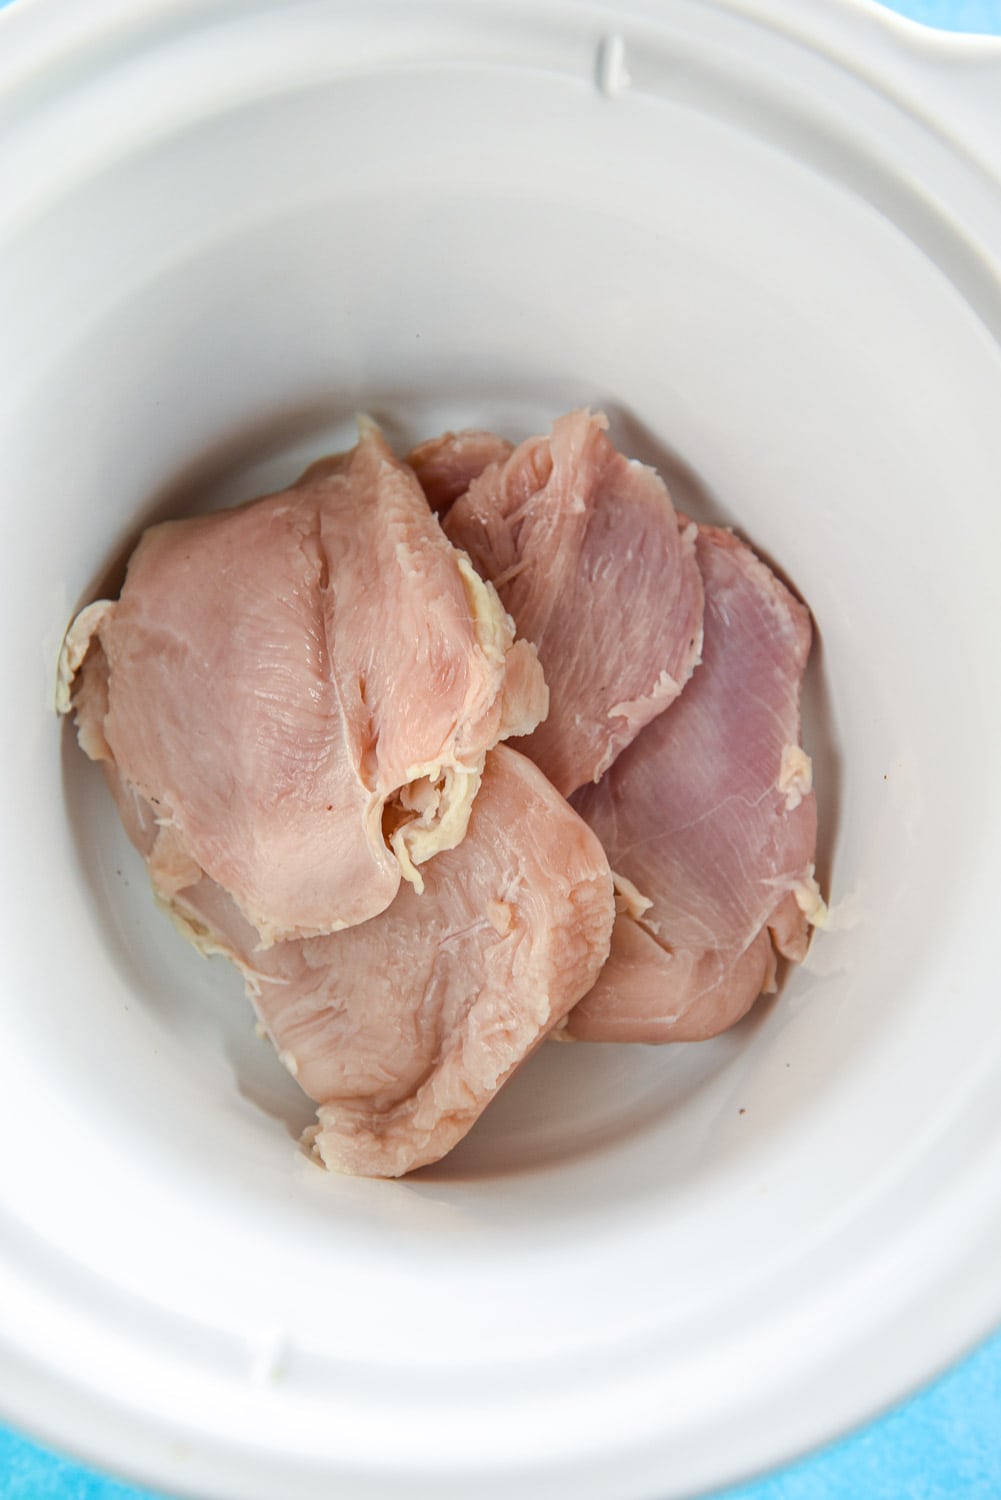 raw chicken in slow cooker